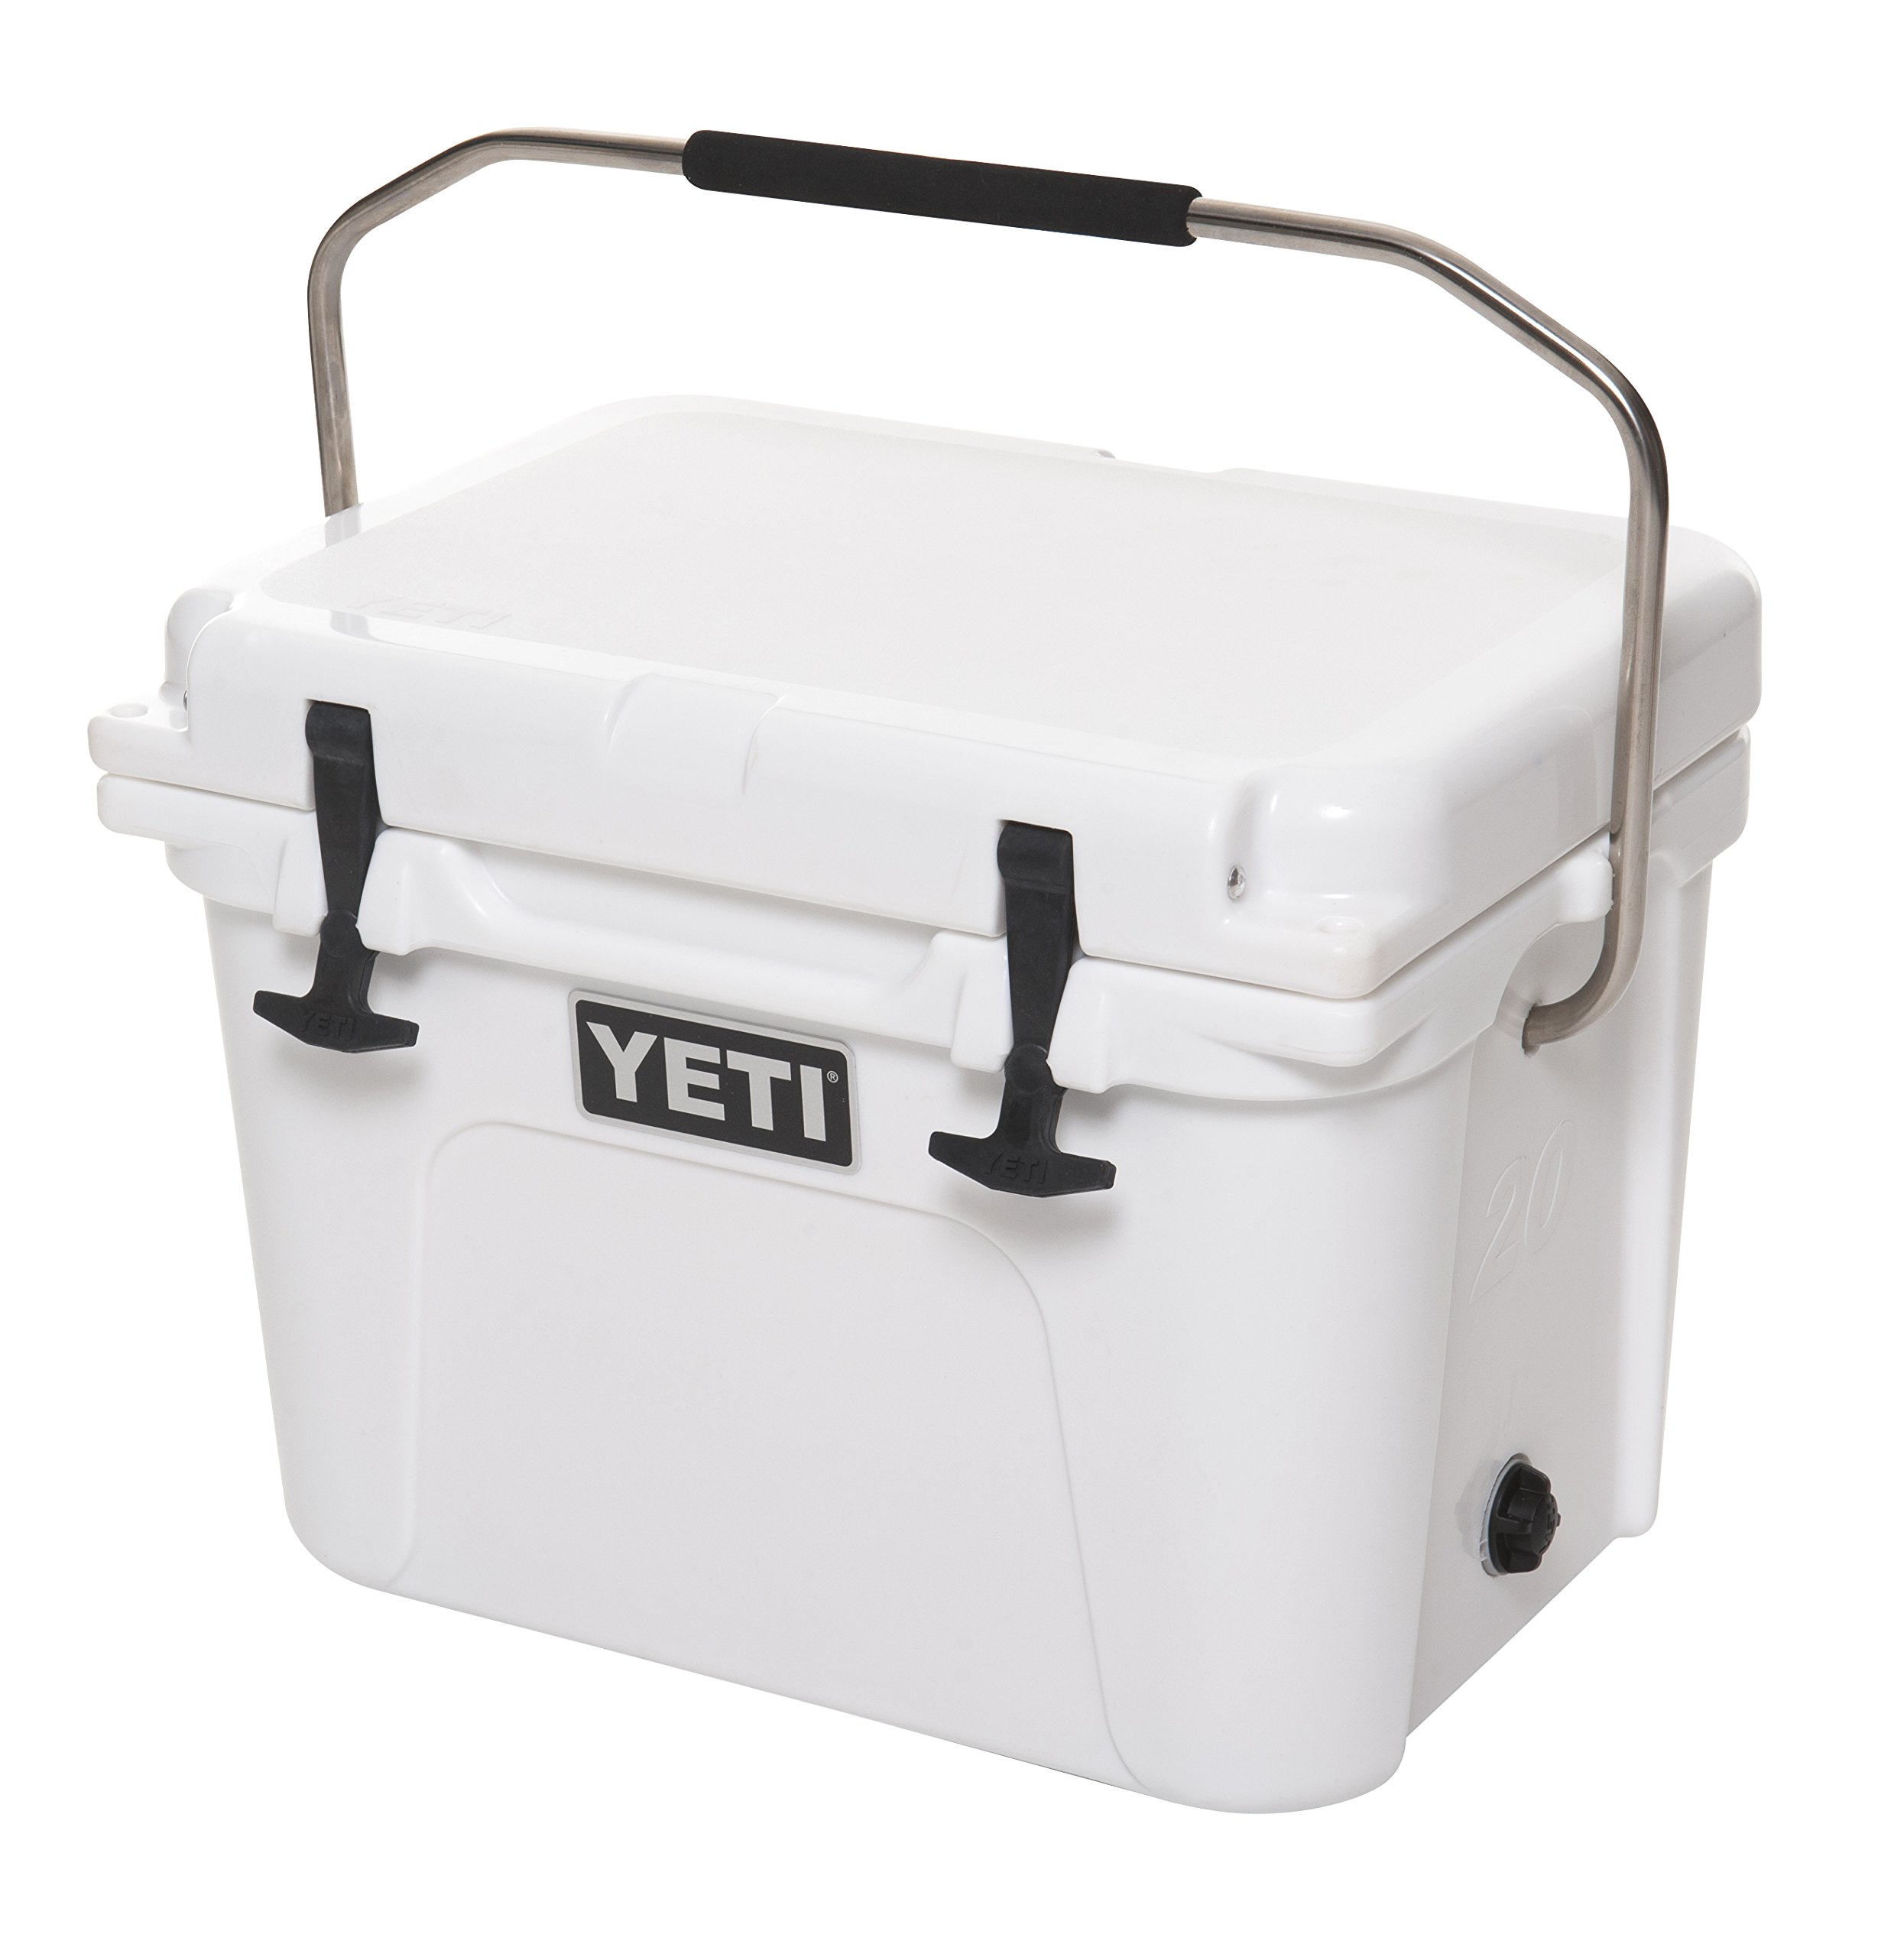 How to Use Yeti Cooler